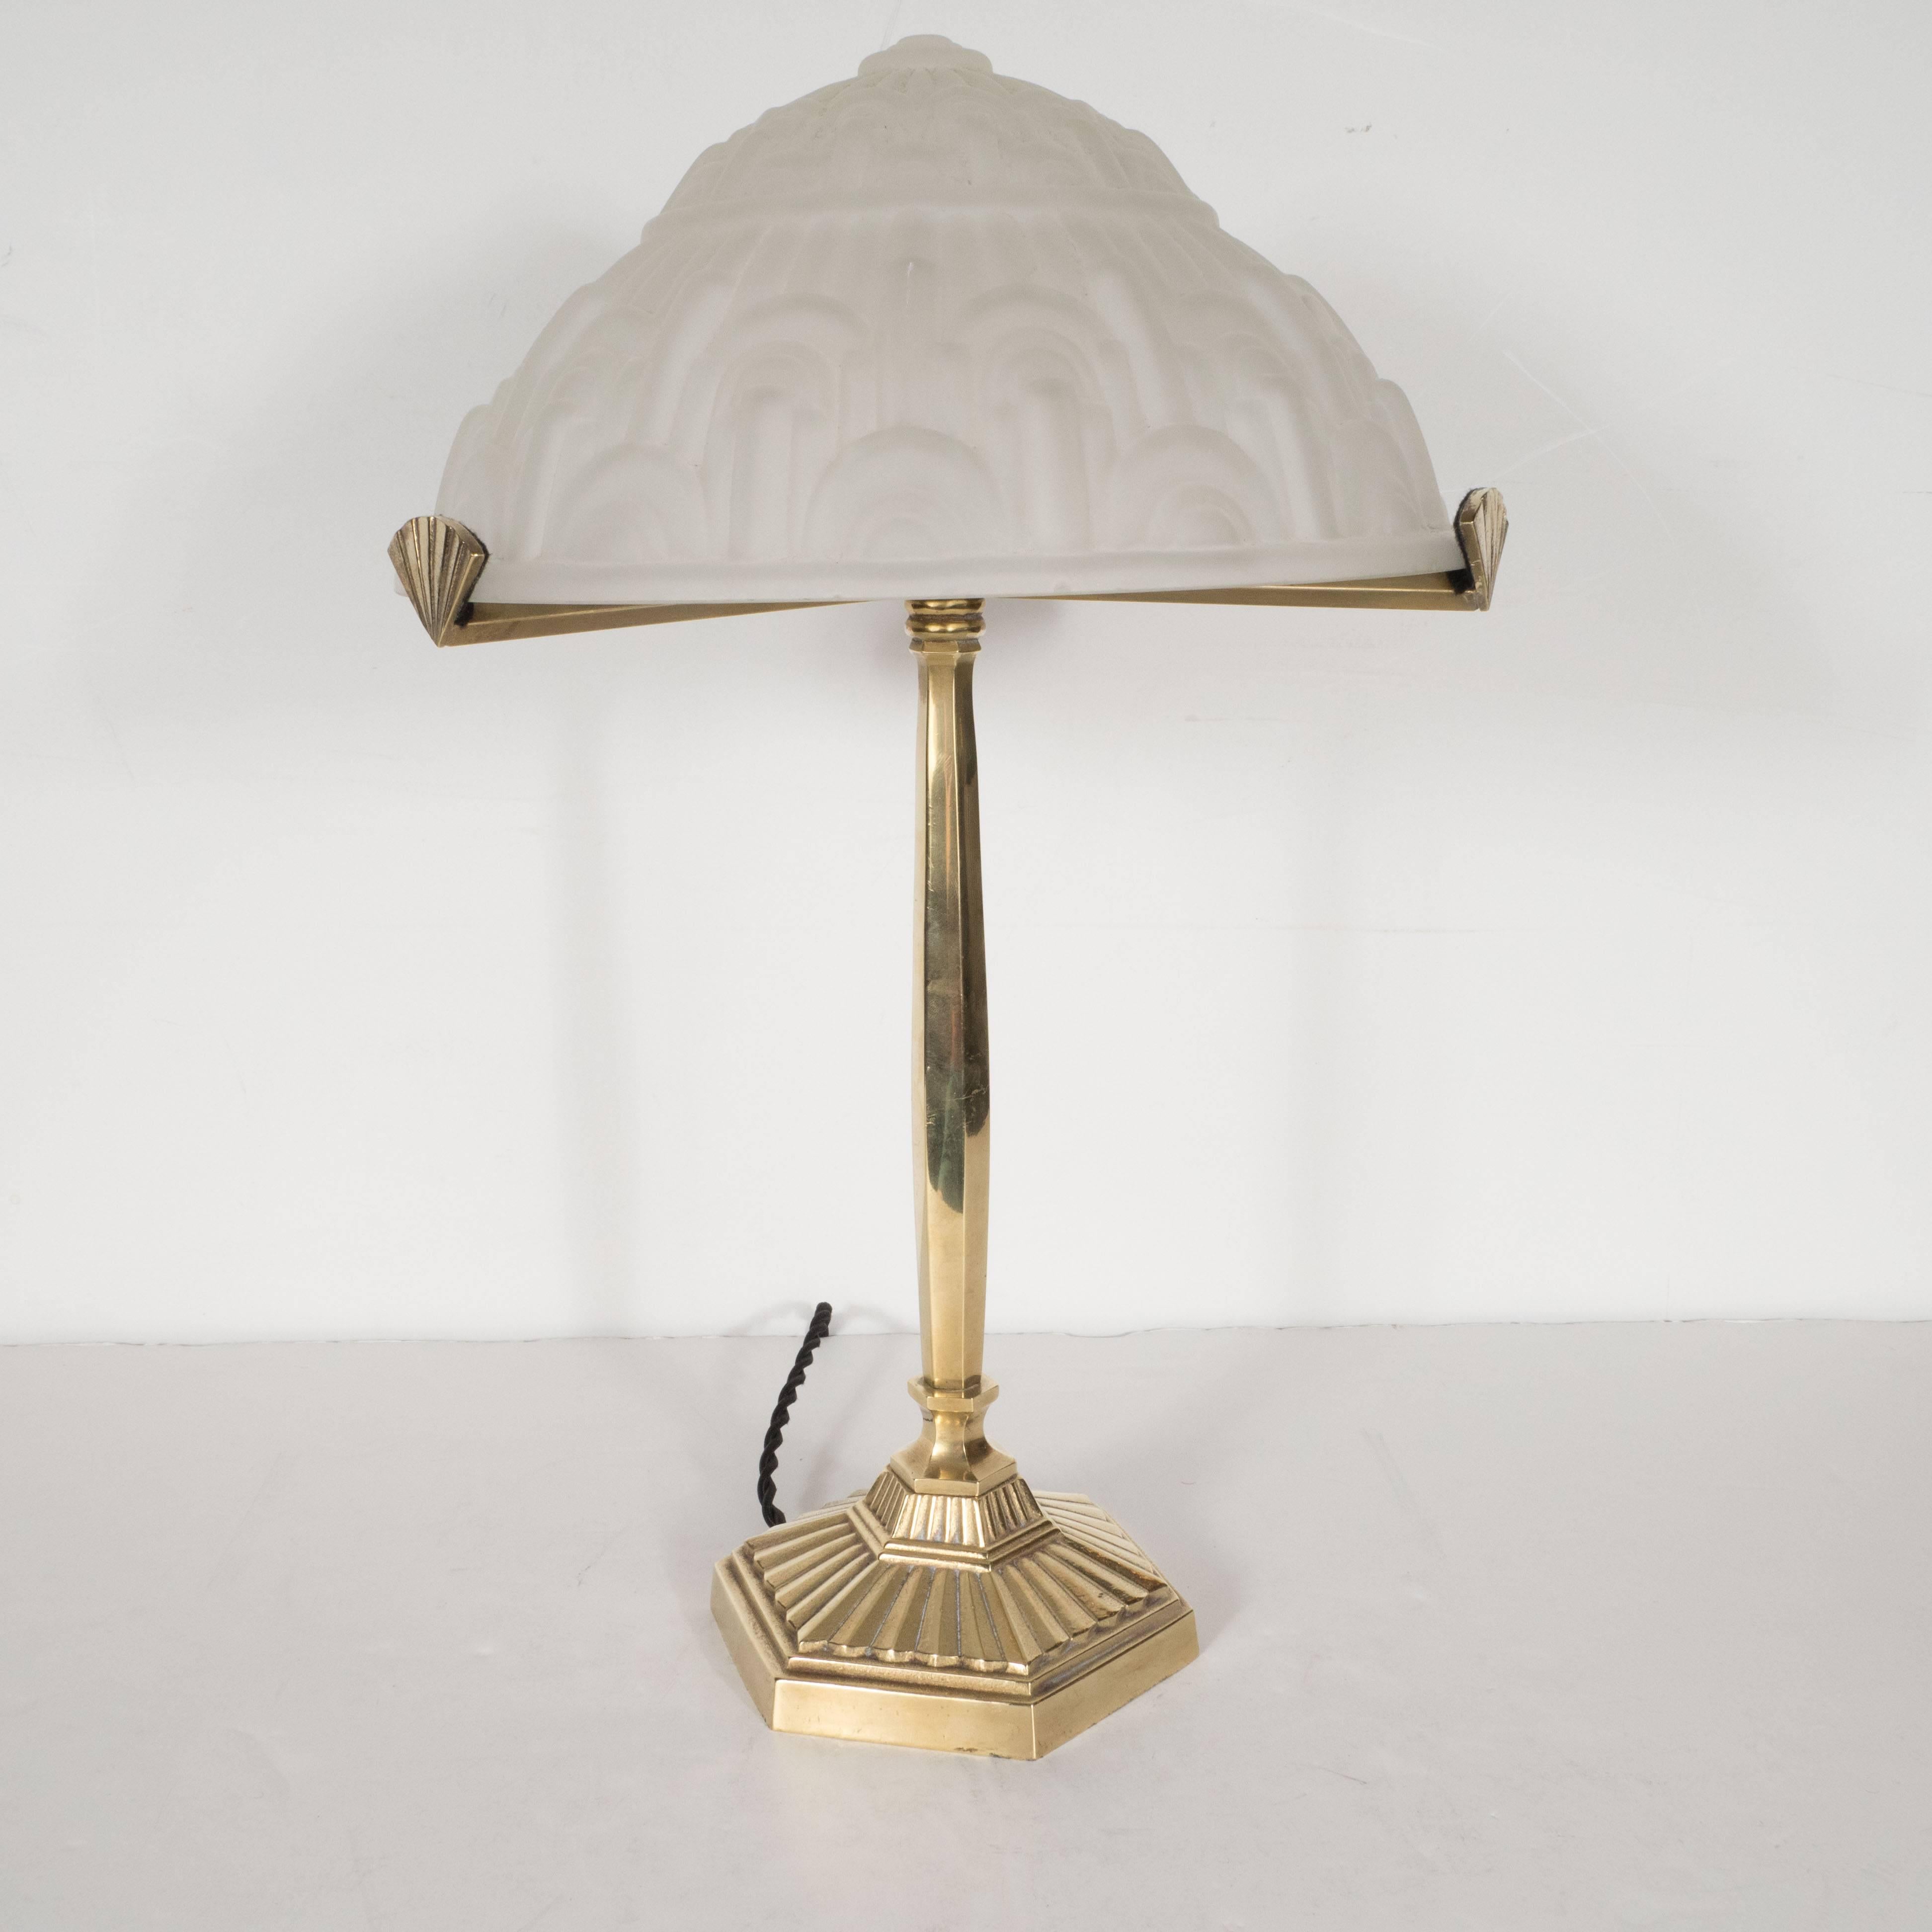 This beautiful Art Deco lamp features a gilded bronze body, three arms with fan embellishments supporting a frosted glass shade with geometric skyscraper style designs. The hexagonal base has been forged in textured gilded bronze and includes a